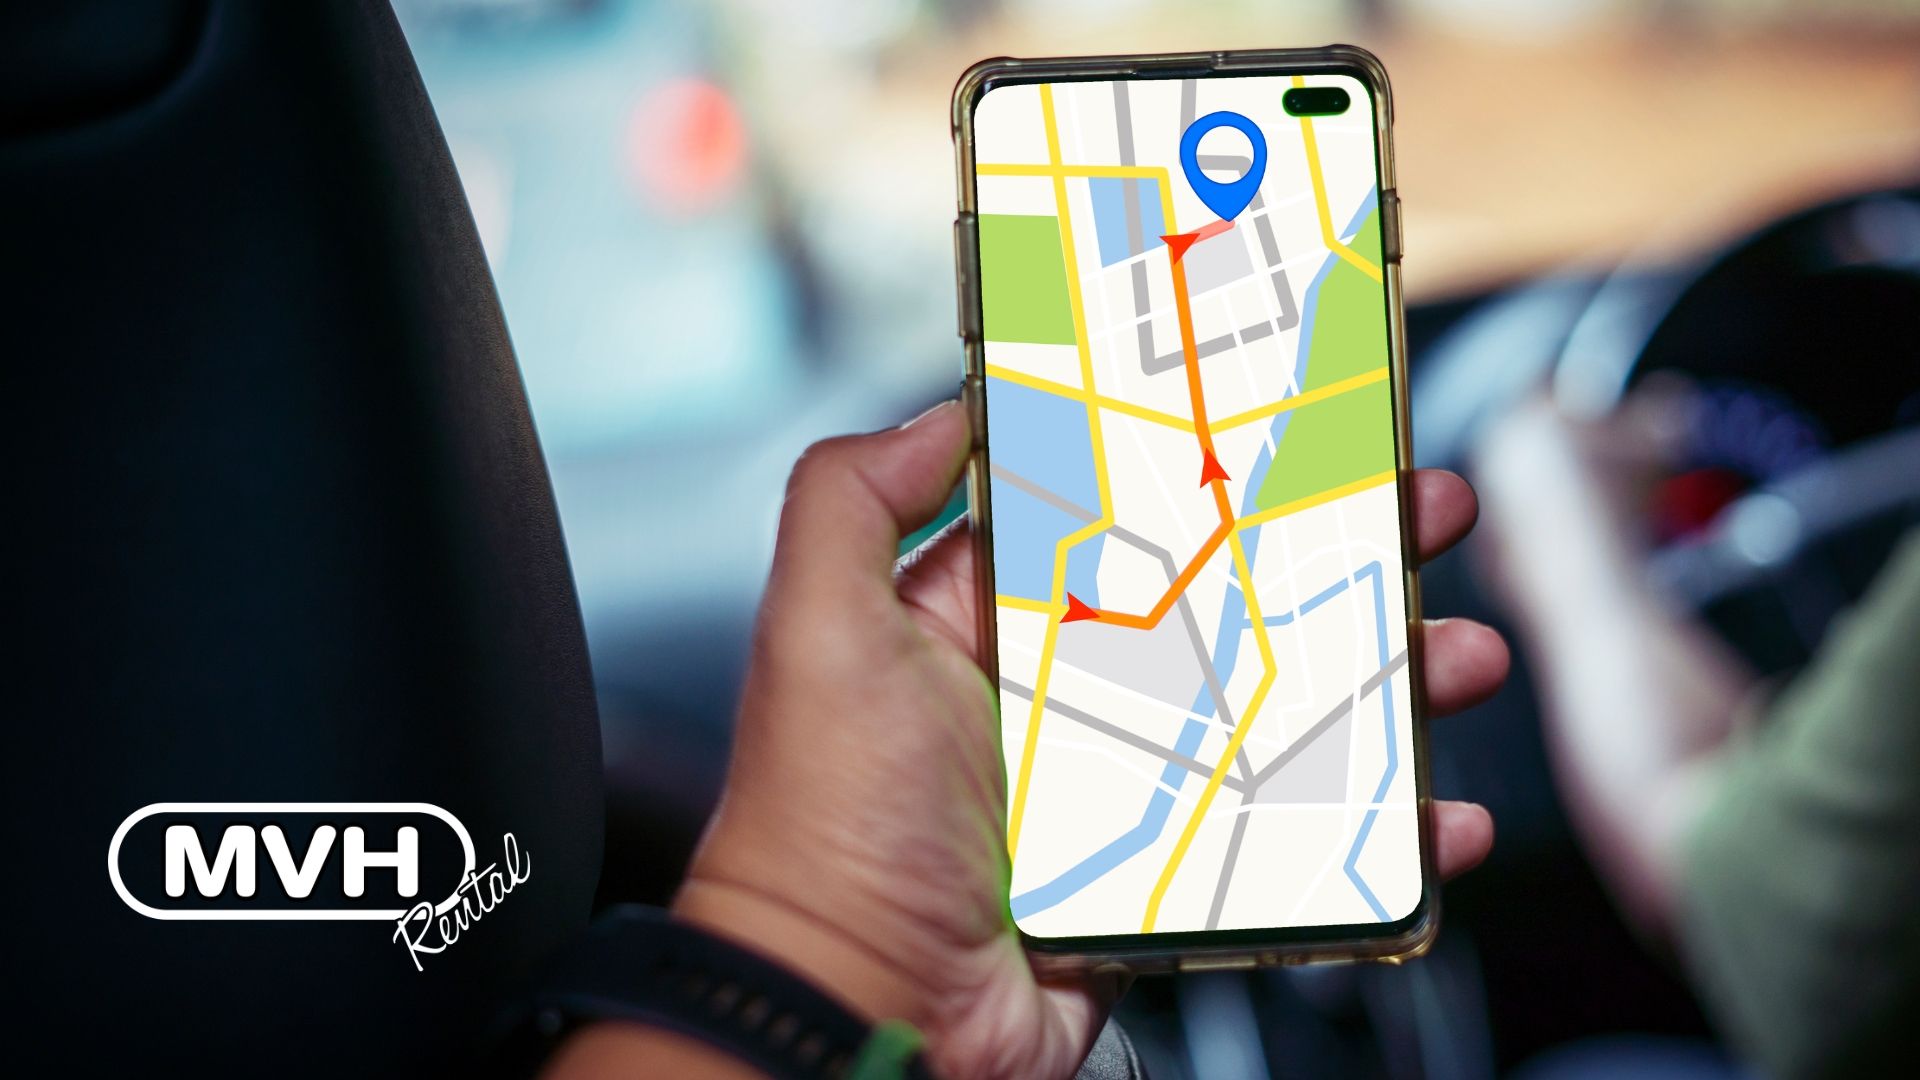 Planning a road trip in a hire car? Discover how to enhance your rental experience with 8 apps that assist with navigation, parking, music and more.
